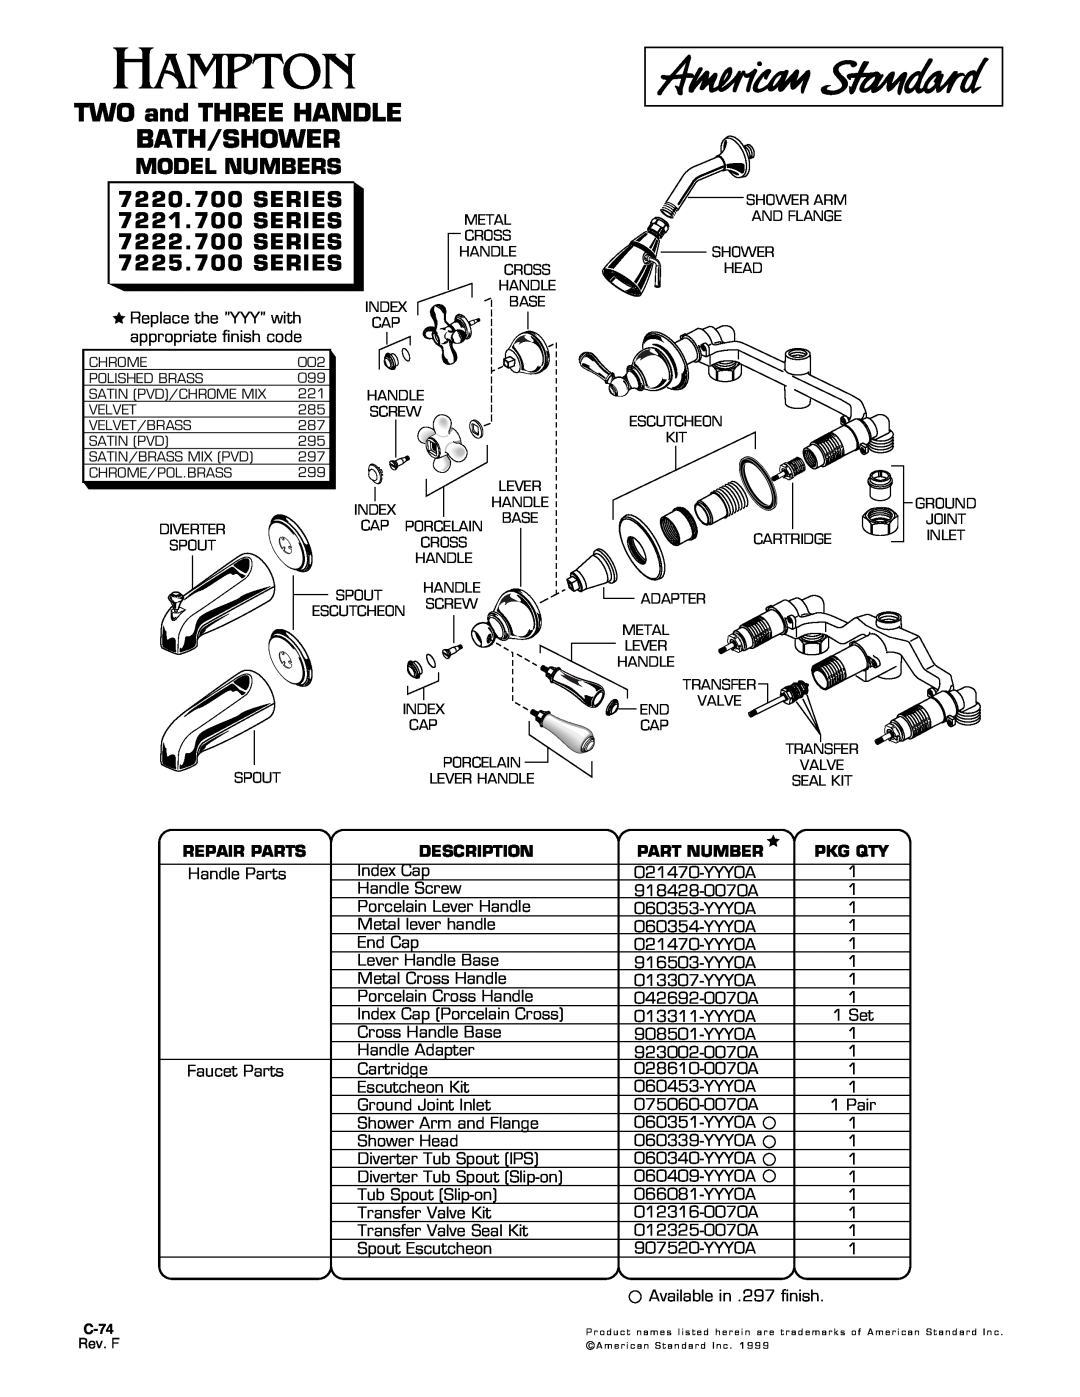 American Standard 7225.700 SERIES manual TWO and THREE HANDLE BATH/SHOWER, Model Numbers, Series, Repair Parts, Pkg Qty 